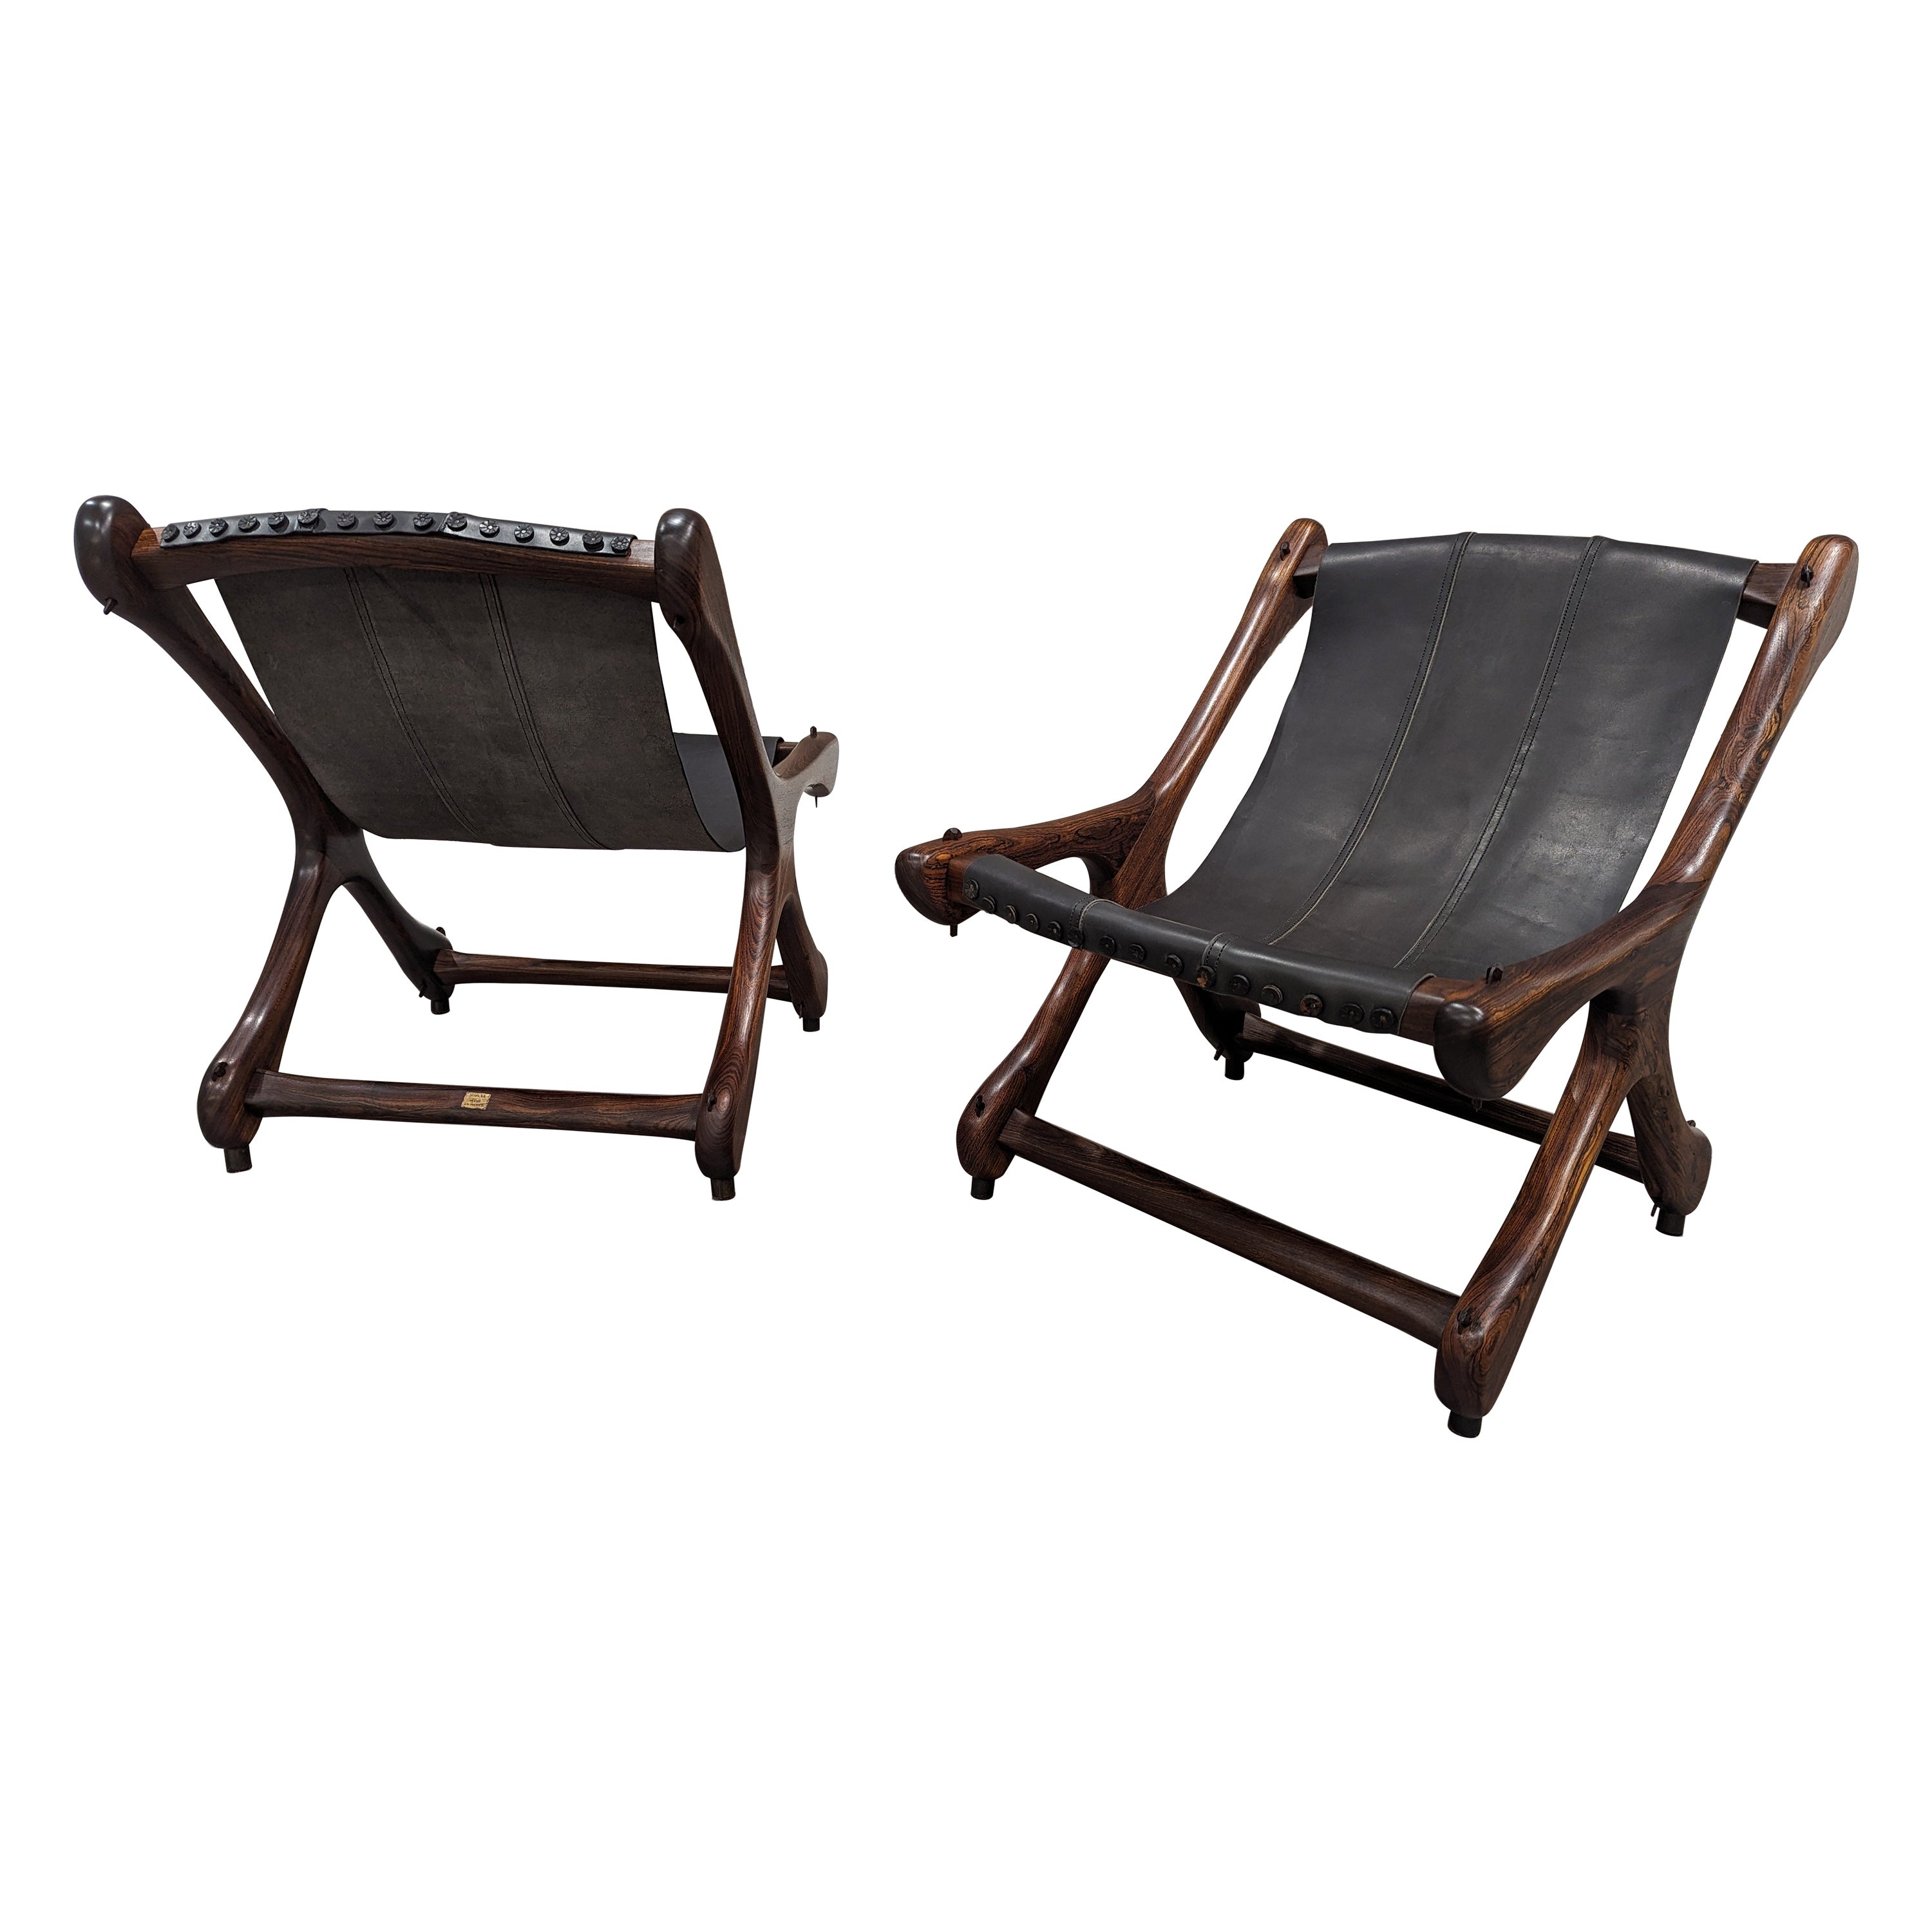 Don Shoemaker Sloucher Rosewood & Leather Sling Chairs for Señal, S.A., 1960s For Sale